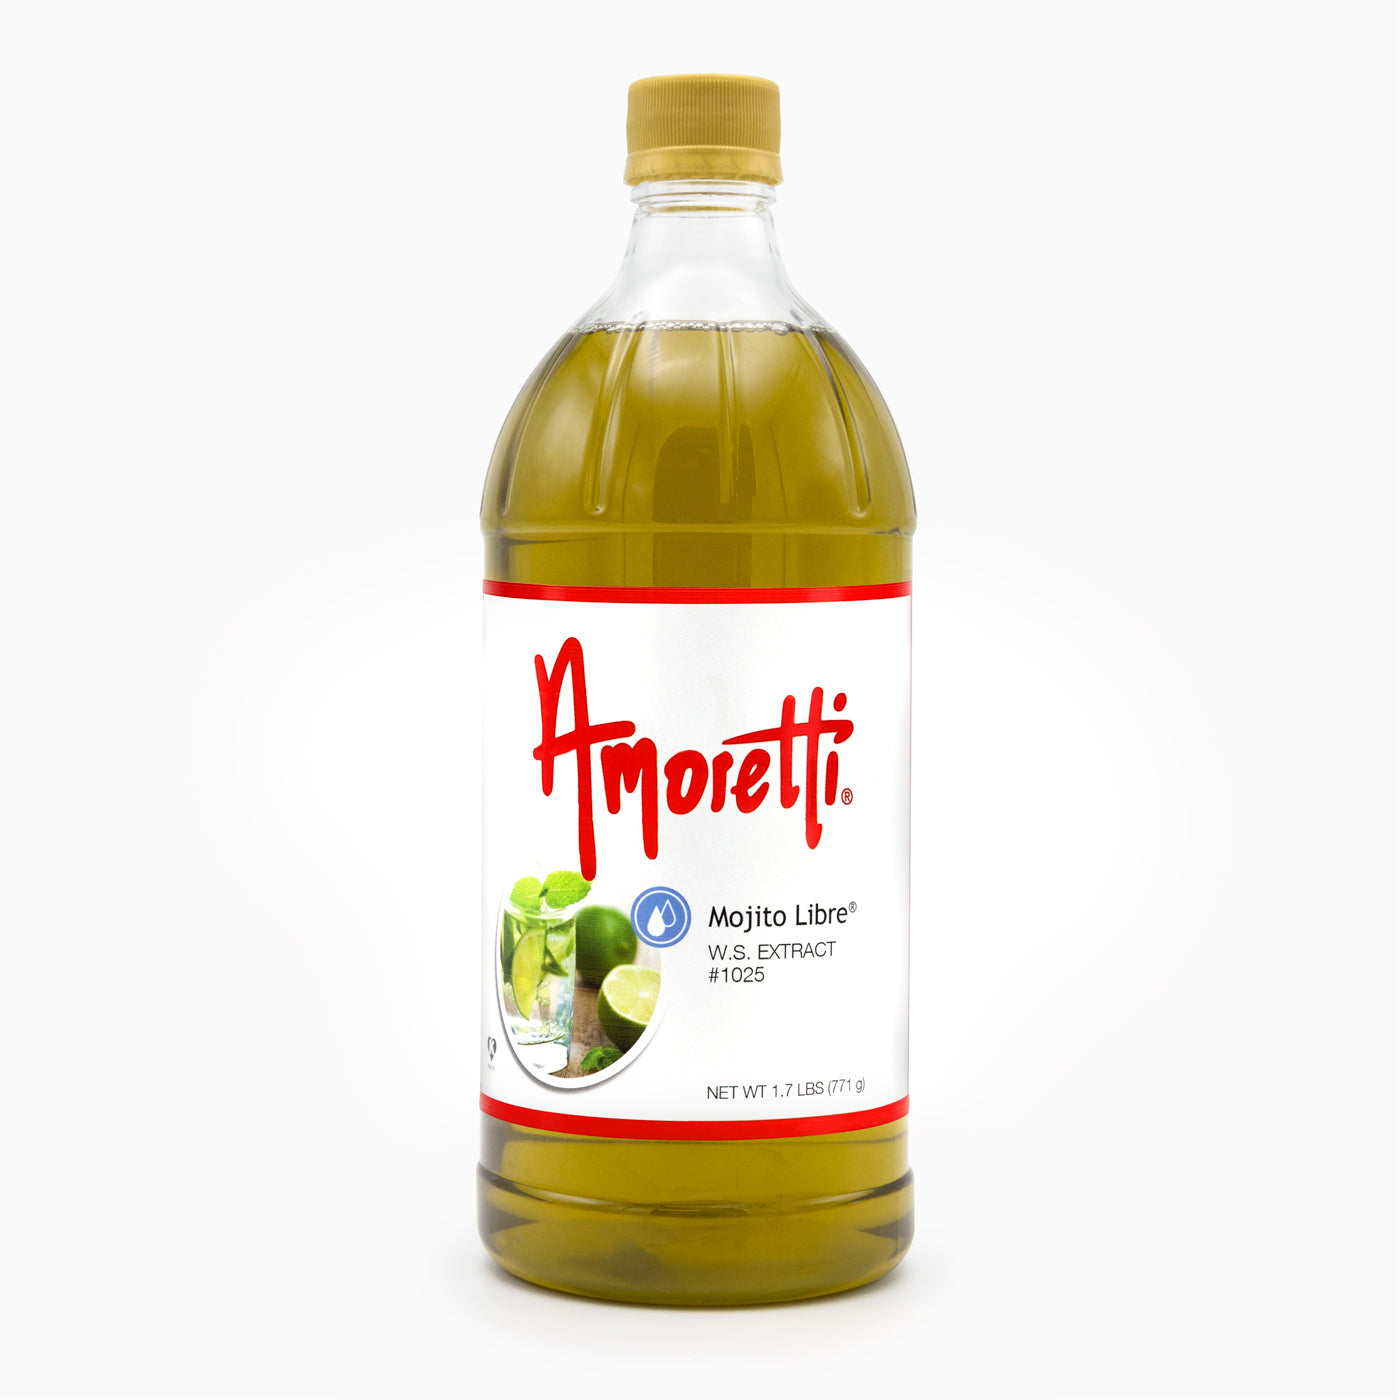 Amoretti & Extract Water Libre Mojito Soluble — lime) (mint